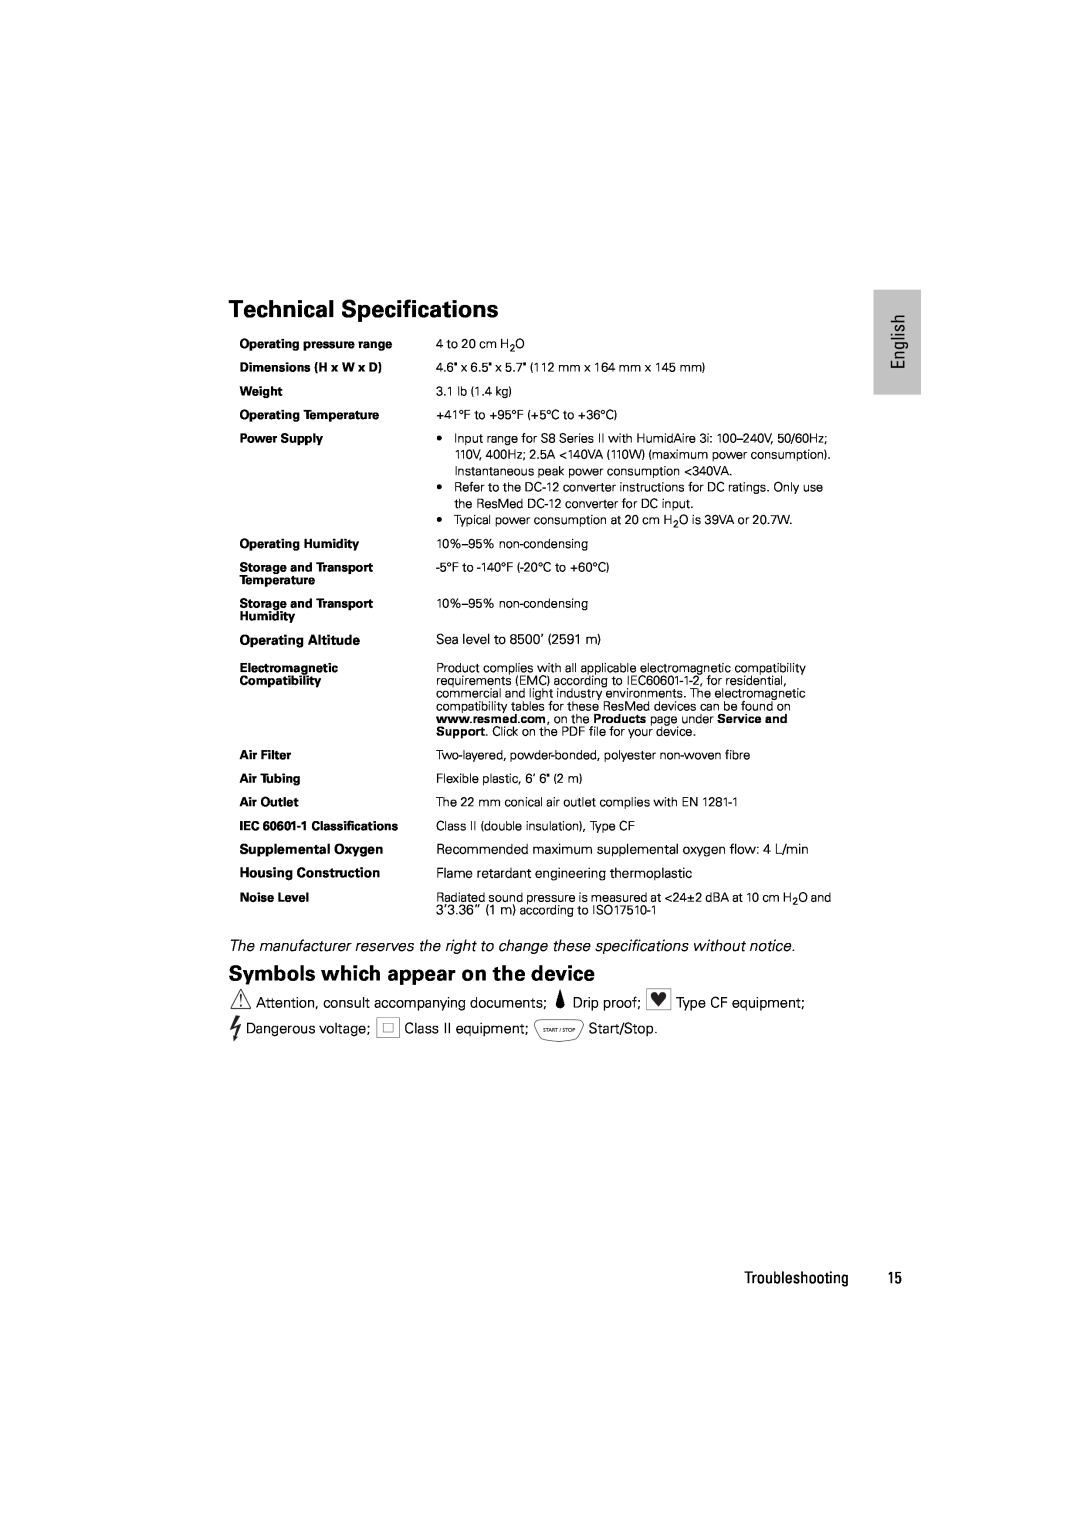 ResMed s8 Technical Specifications, Symbols which appear on the device, English, Operating Altitude, Supplemental Oxygen 